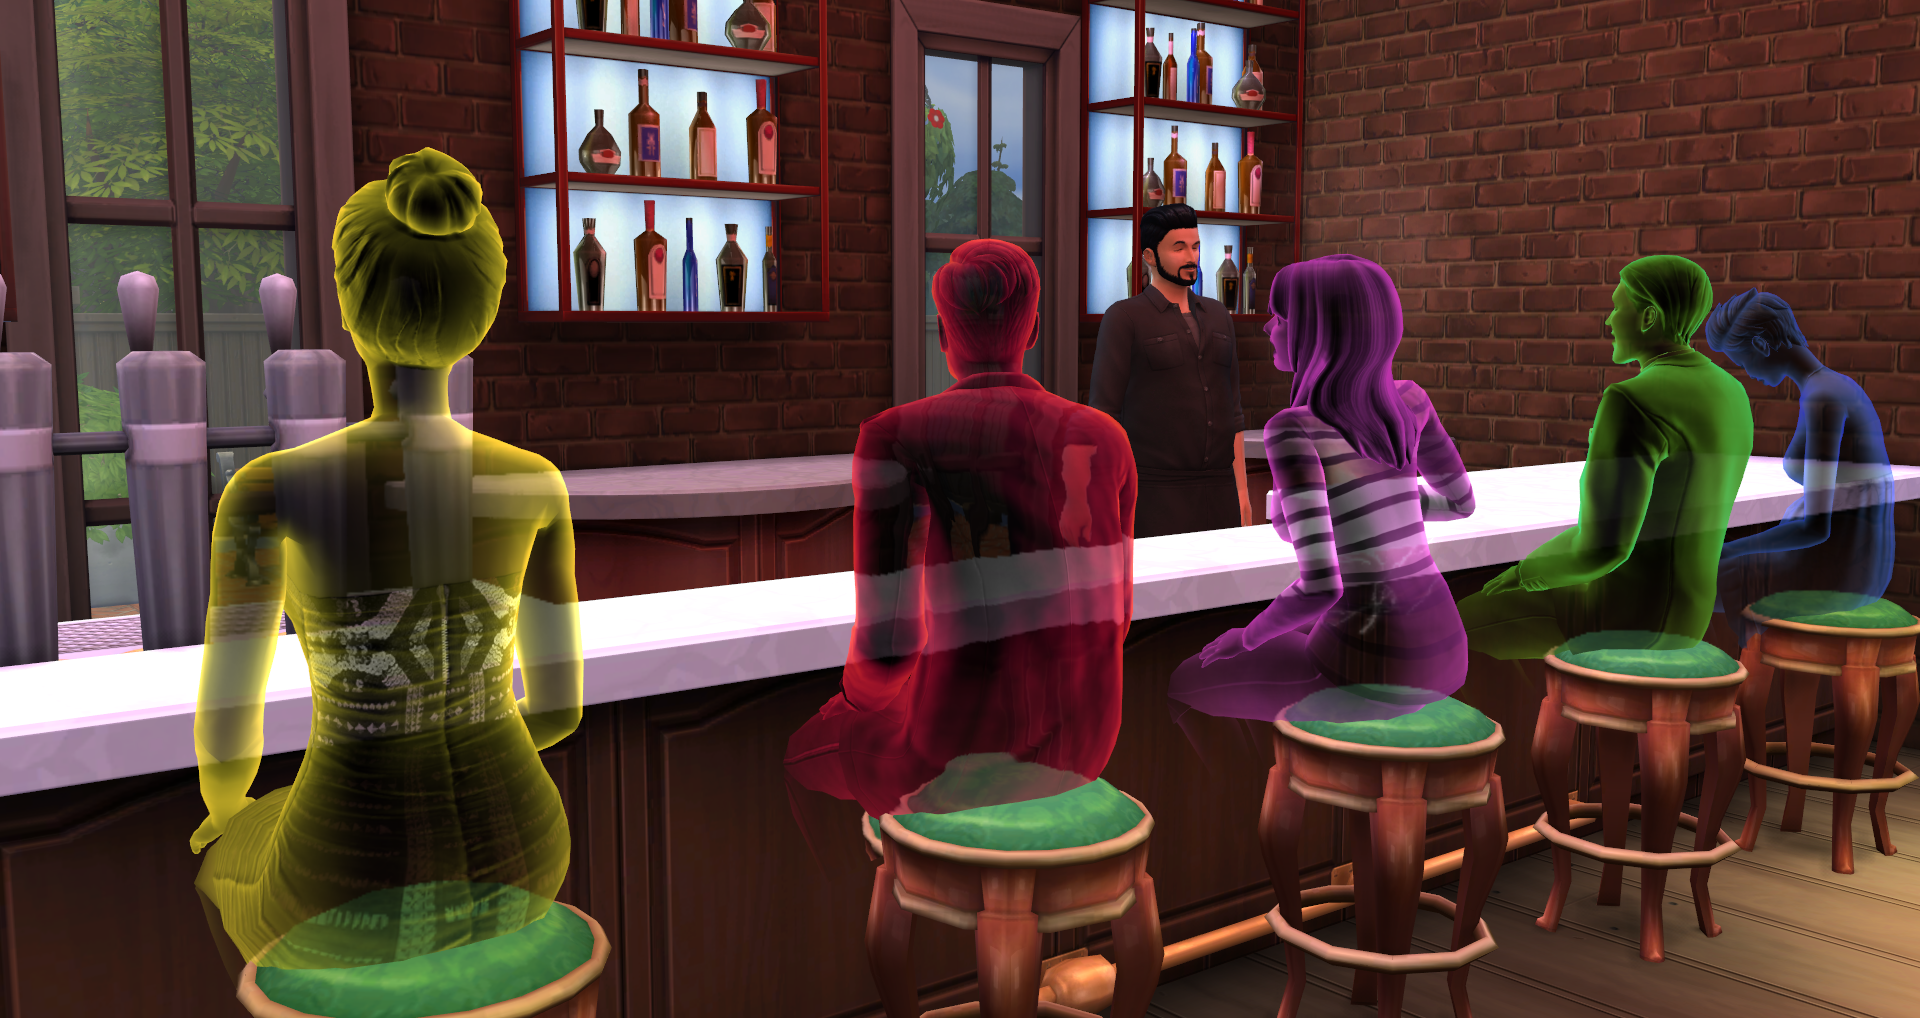 Guide Death Types And Killing Sims In The Sims 4 Simsvip